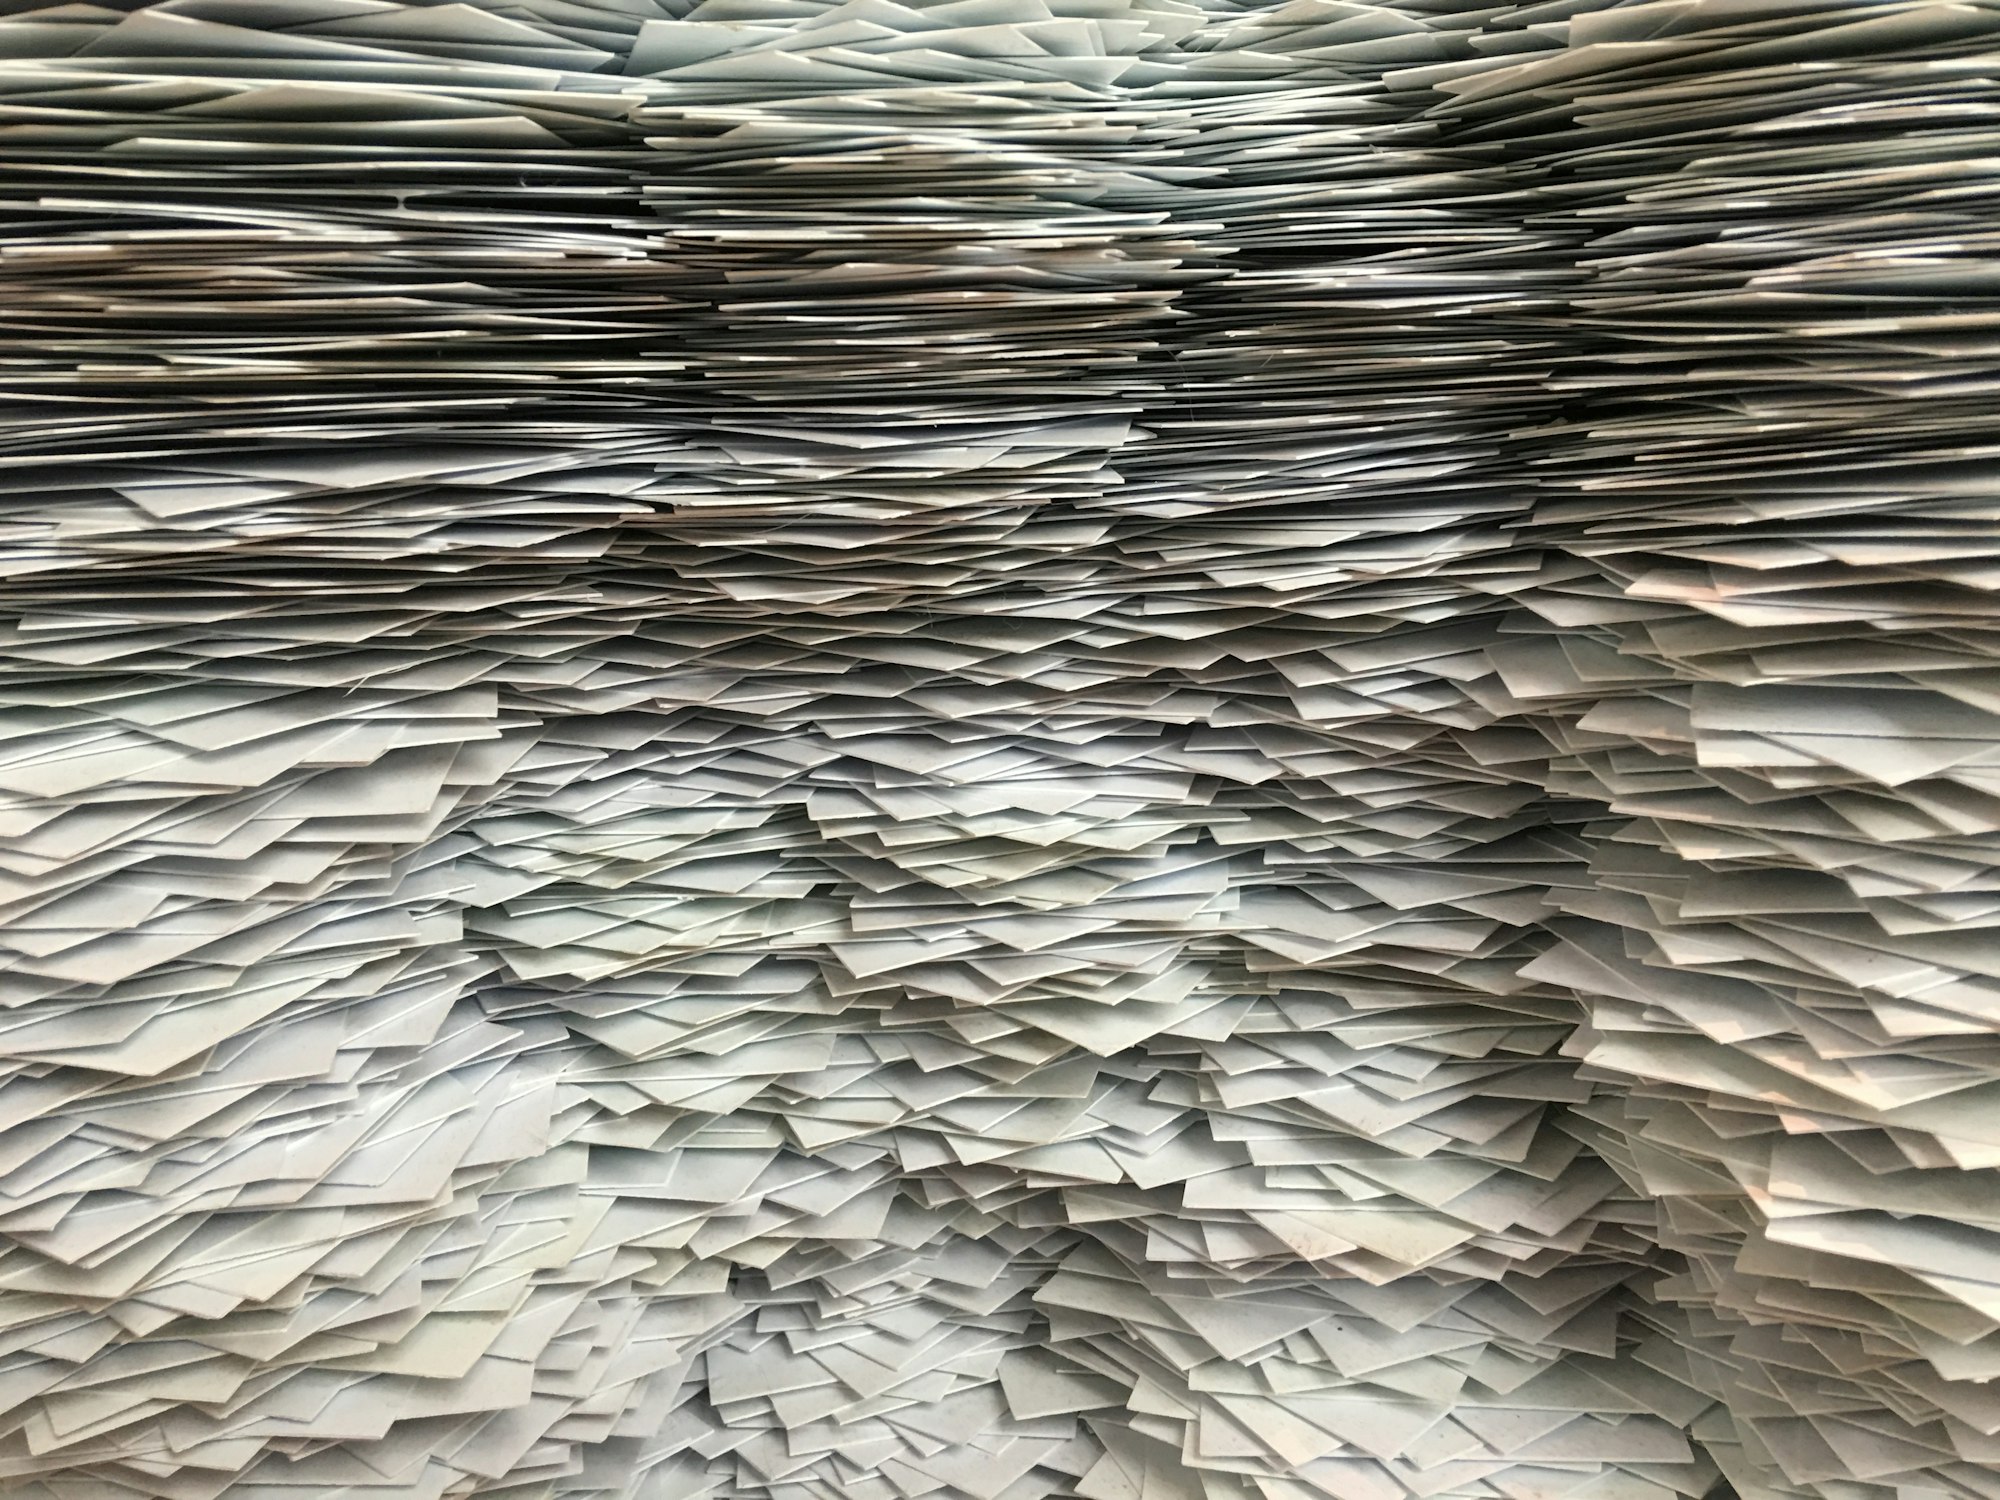 I went to a Renwick Gallery in DC during lunch time and was excited about the stacks of paper that was used to create a huge mountain. This shot was exceptionally intriguing to me since it allows you to describe the image however you like.